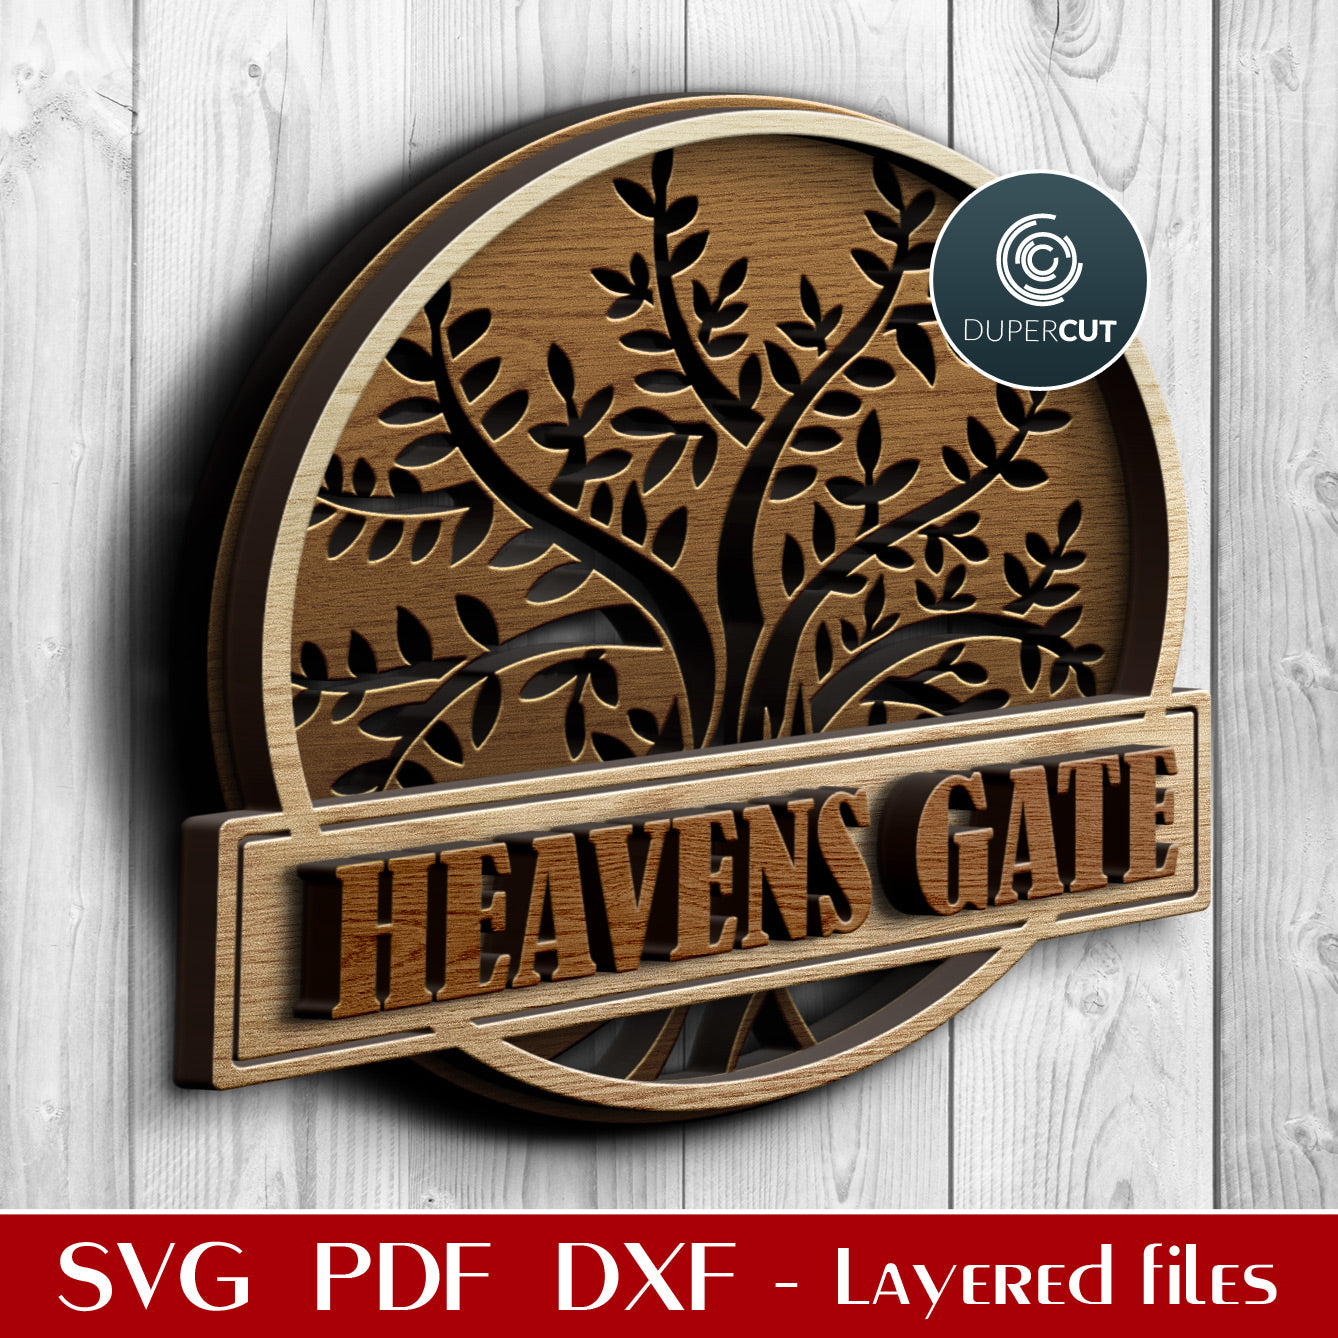 Tree of life sign with editable custom text - SVG PDF DXF layered files for laser cutting machines - Glowforge, CNC plasma, Cricut, Silhouette cameo by DuperCut